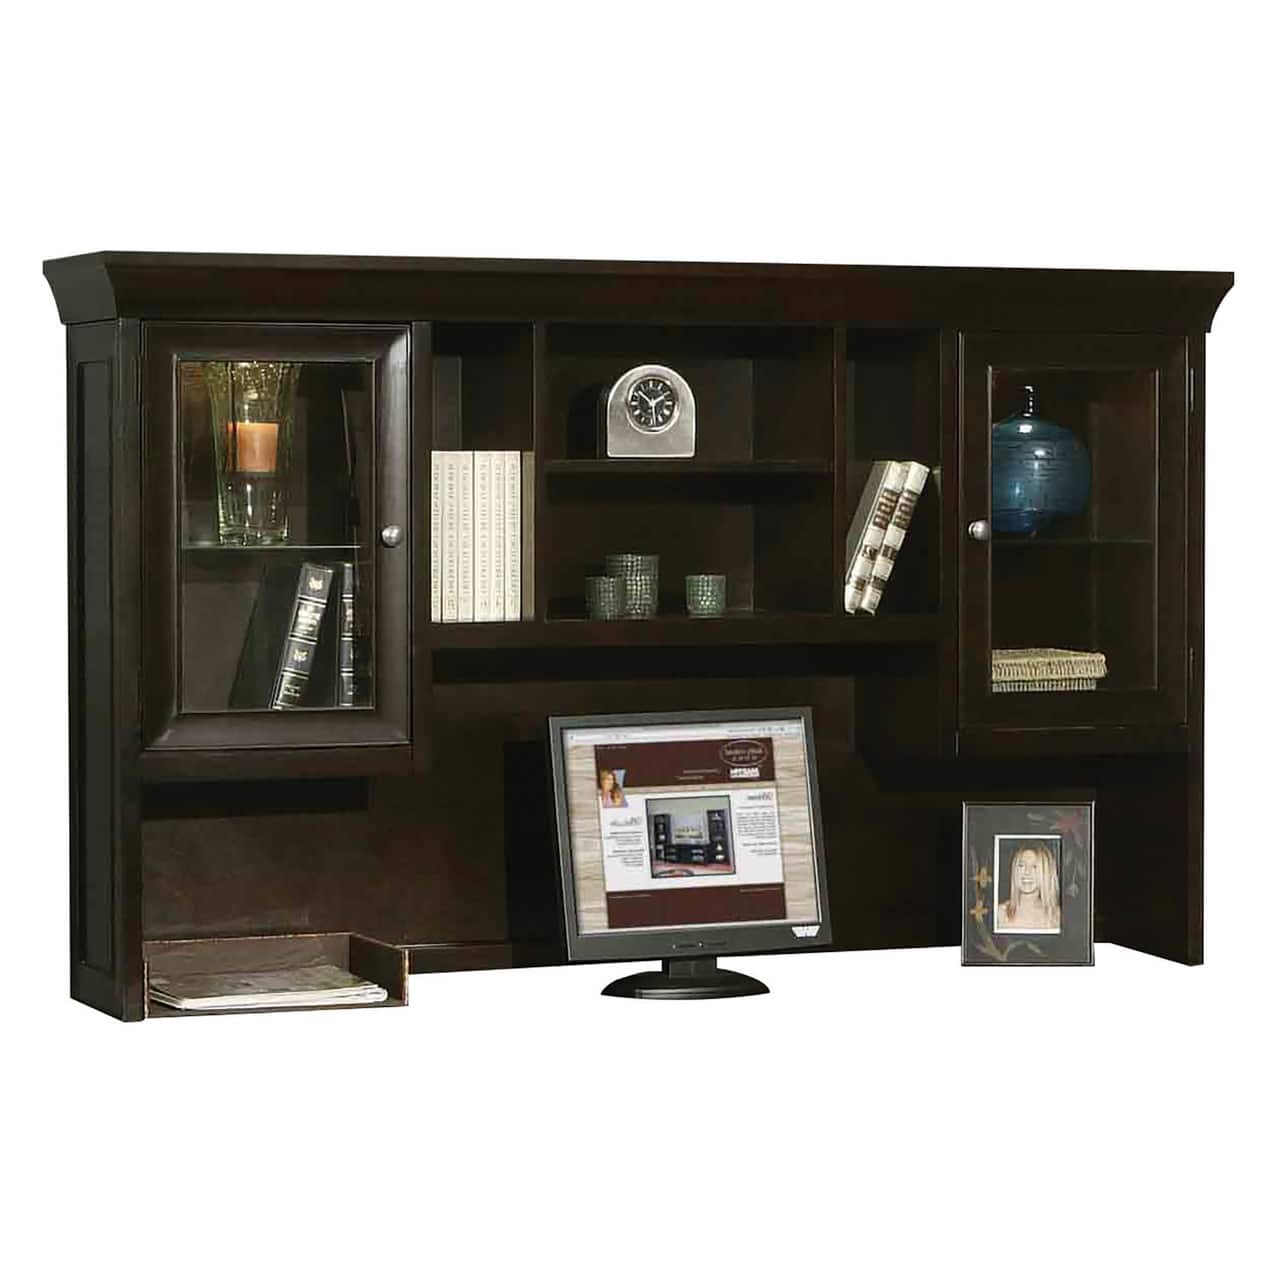 Transitional Executive Space Saver Desk, espresso, top hutch only